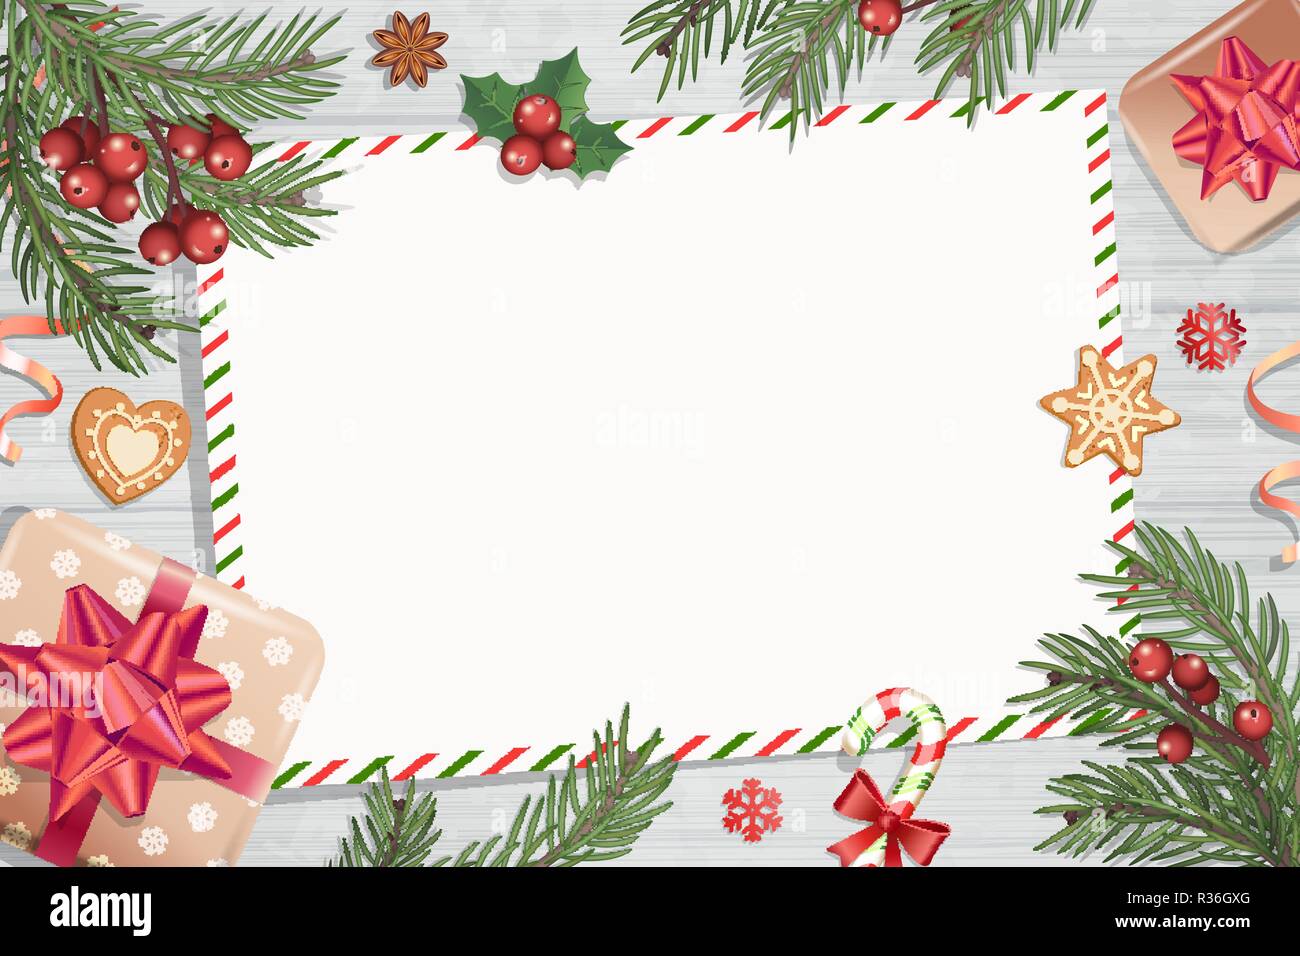 Template of Christmas Letters and wishes on wooden background with ...